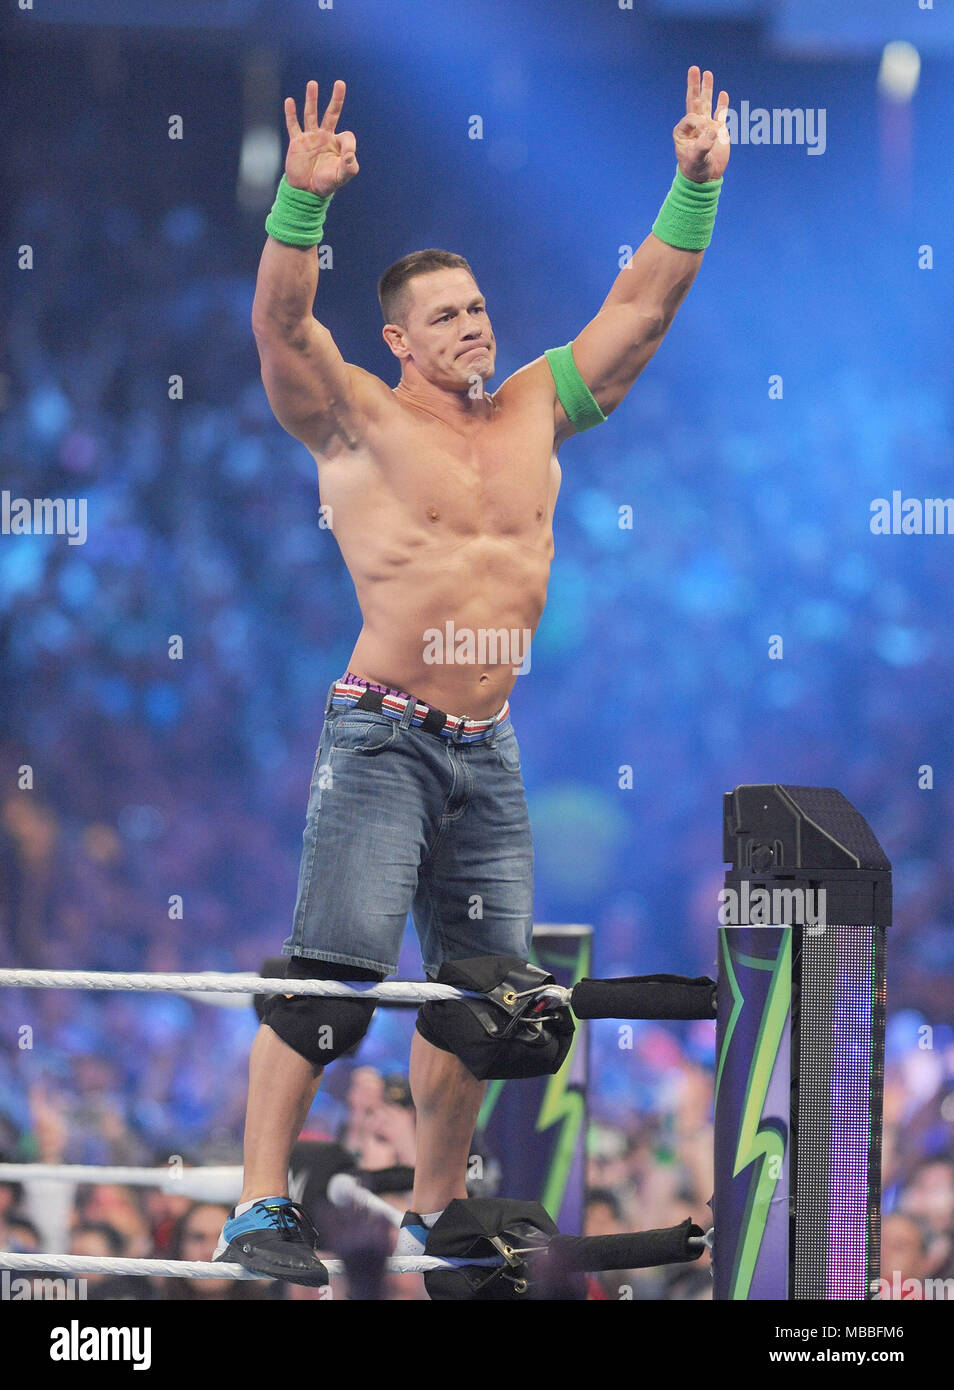 New Orleans, LA, USA. 8th Apr, 2018. John Cena at WWE Wrestlemania 34 at the Mercedes-Benz Superdome in New Orleans, Louisiana on April 8, 2018. Credit: George Napolitano/Media Punch/Alamy Live News Stock Photo